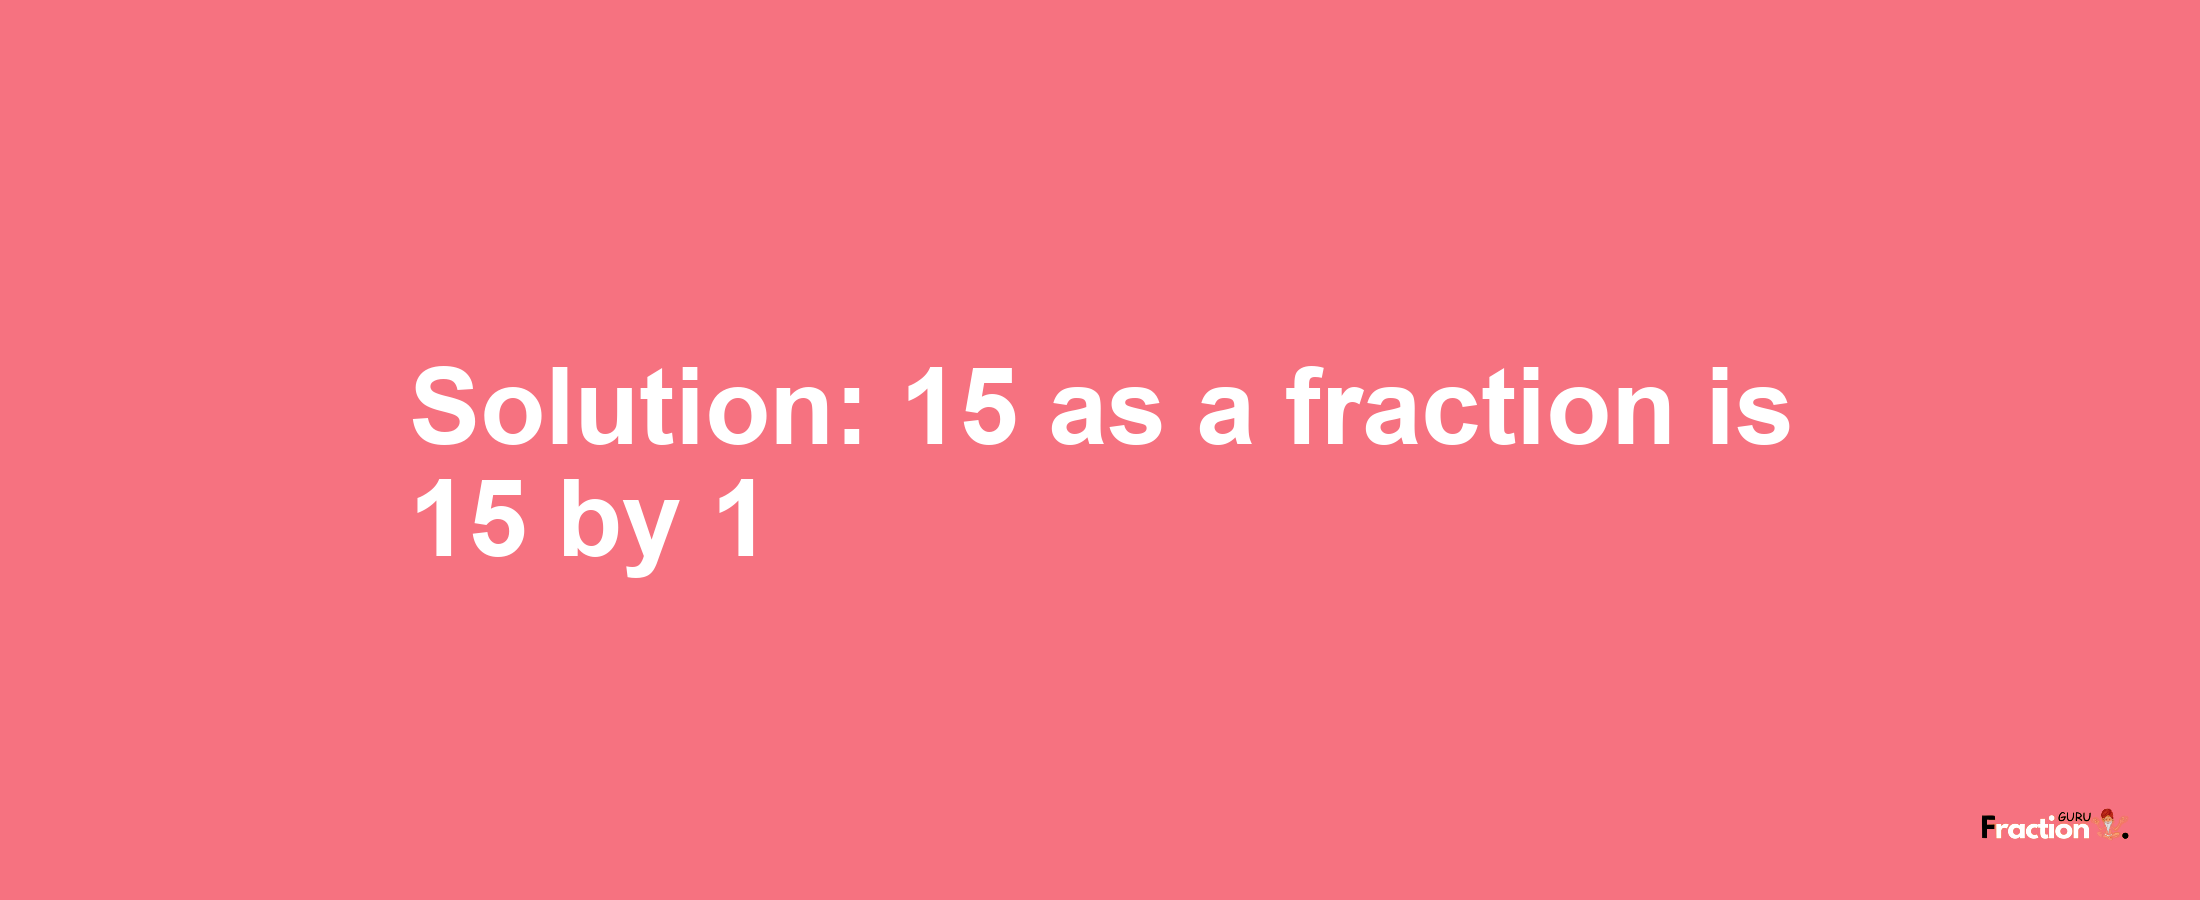 Solution:15 as a fraction is 15/1